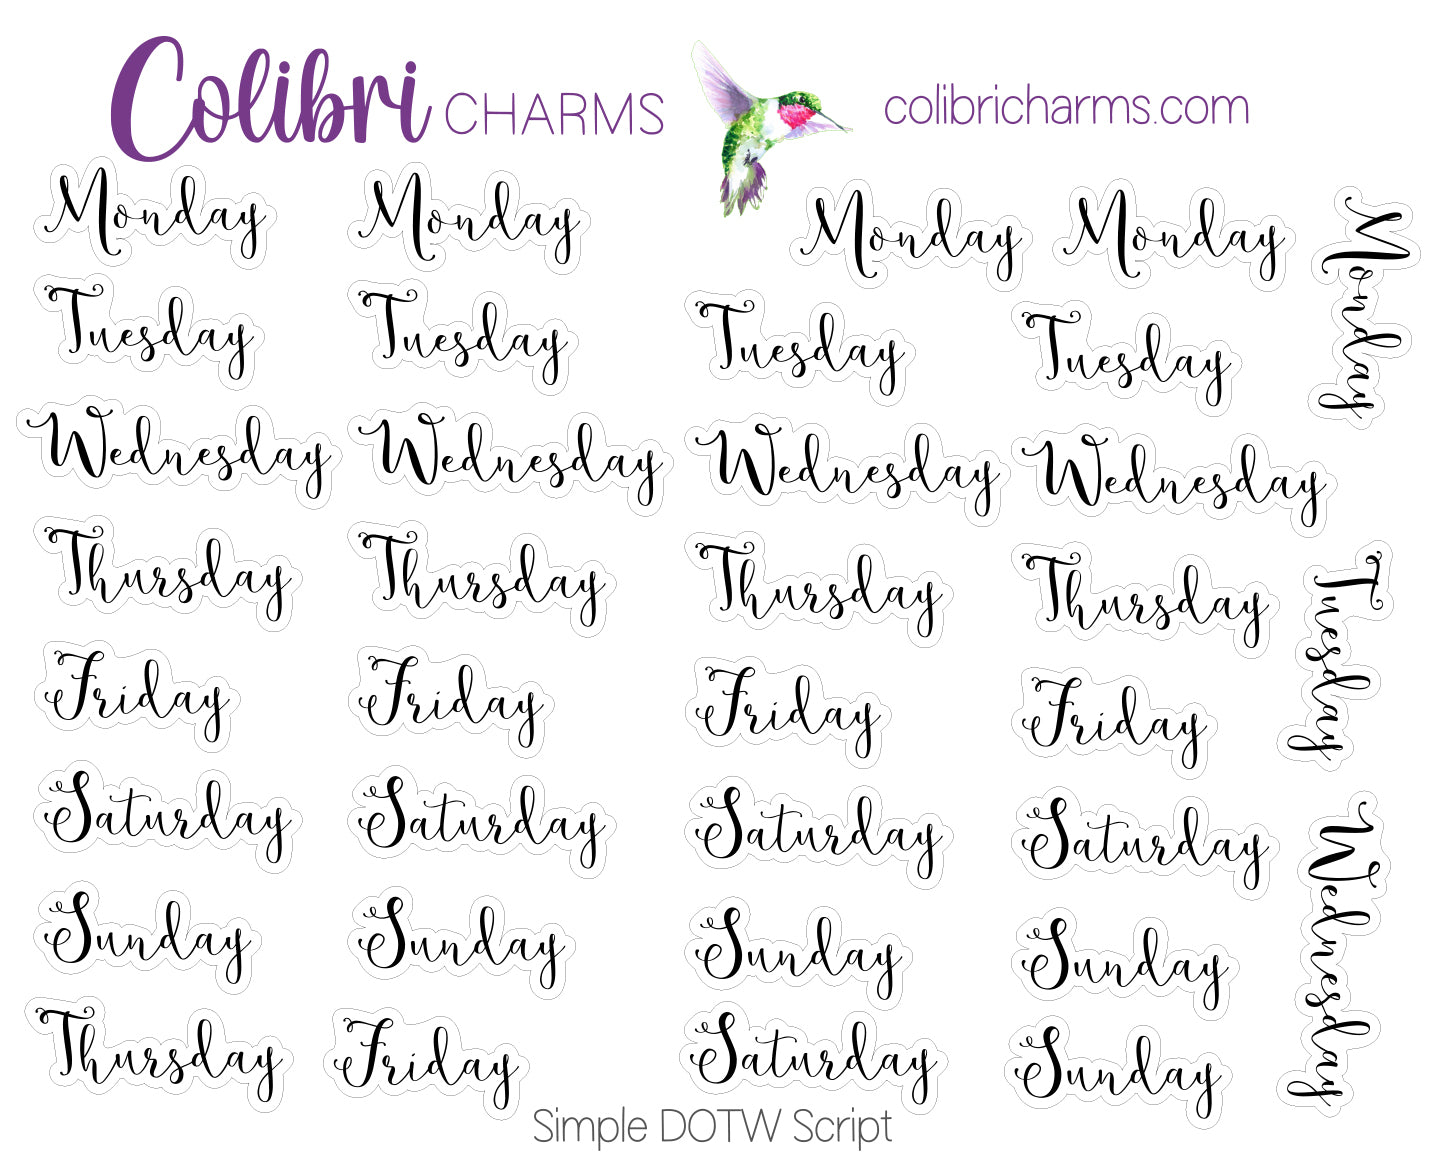 Days of the Week Planner Stickers